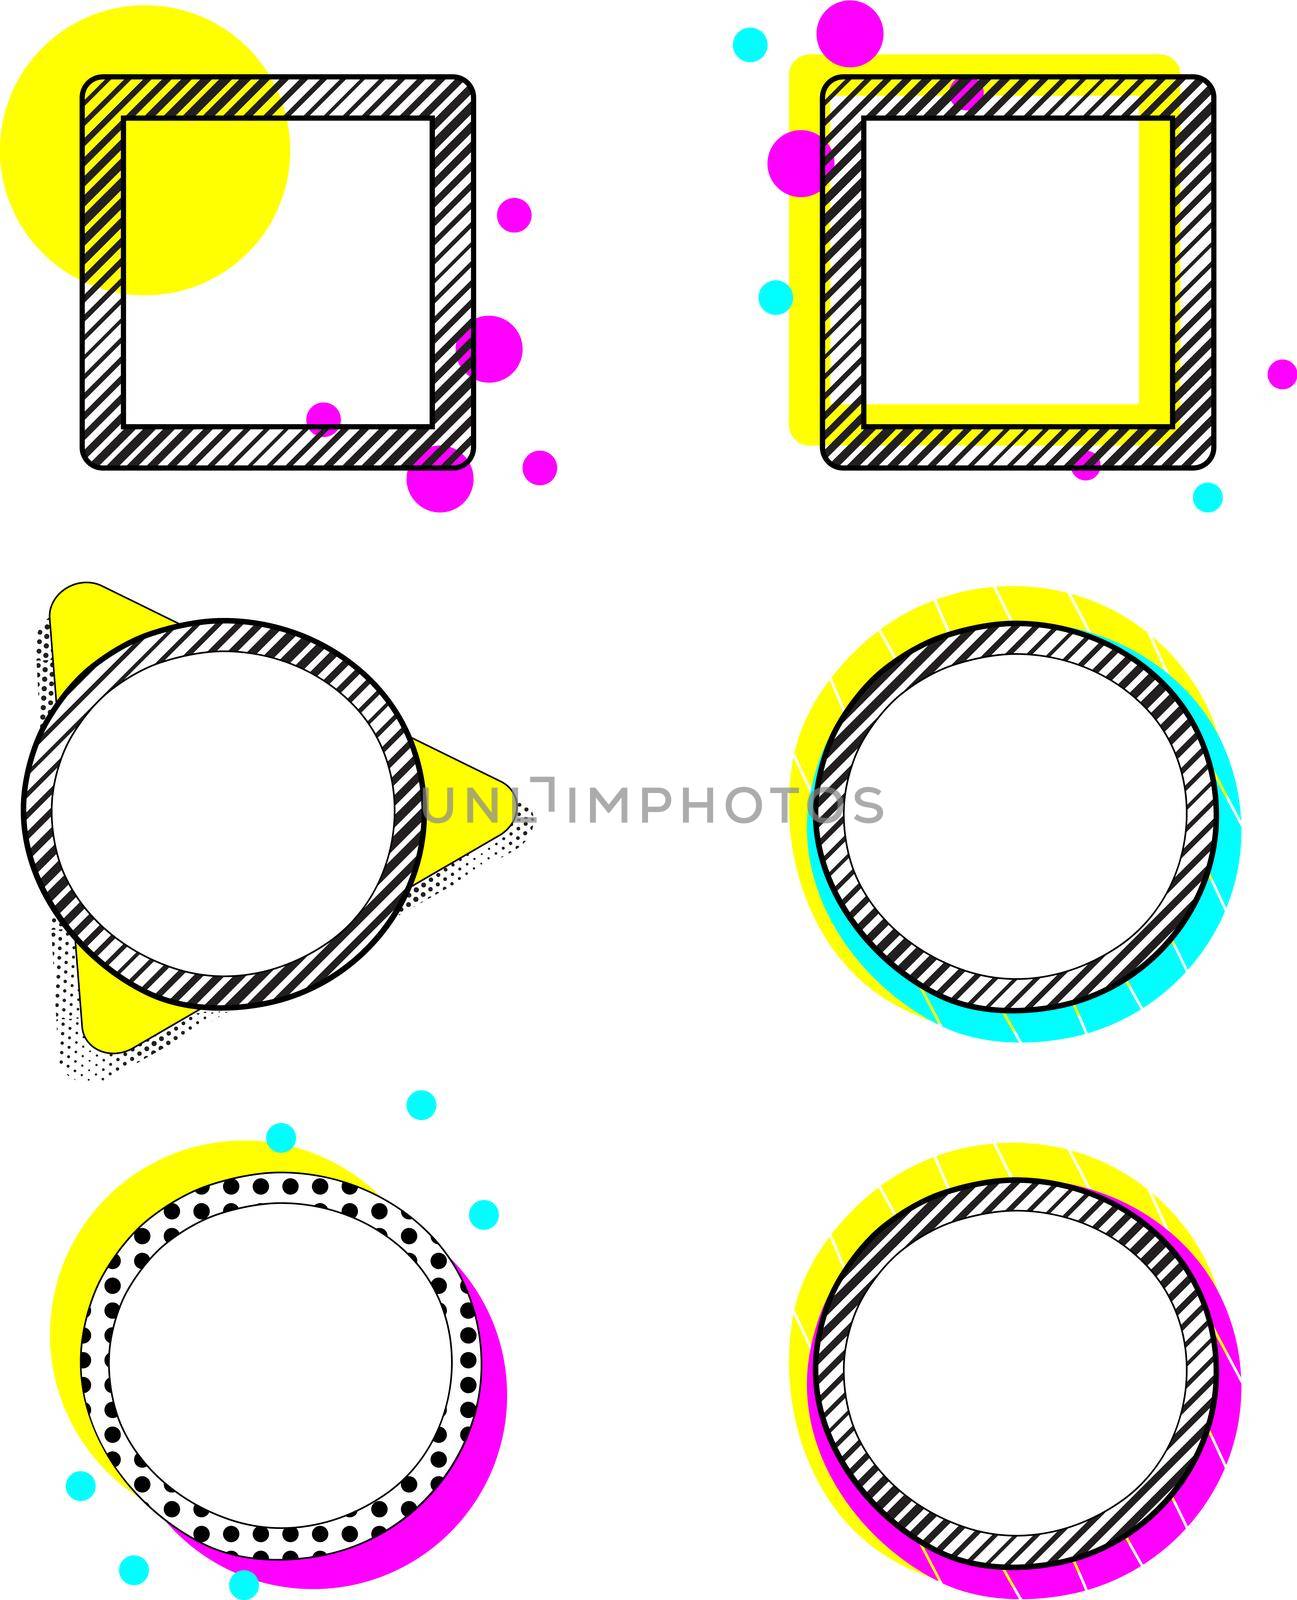 Six 80s-inspired geometric square and circle frames with neon blue, purple, and yellow coloring. Isolated vecotr illustrations.